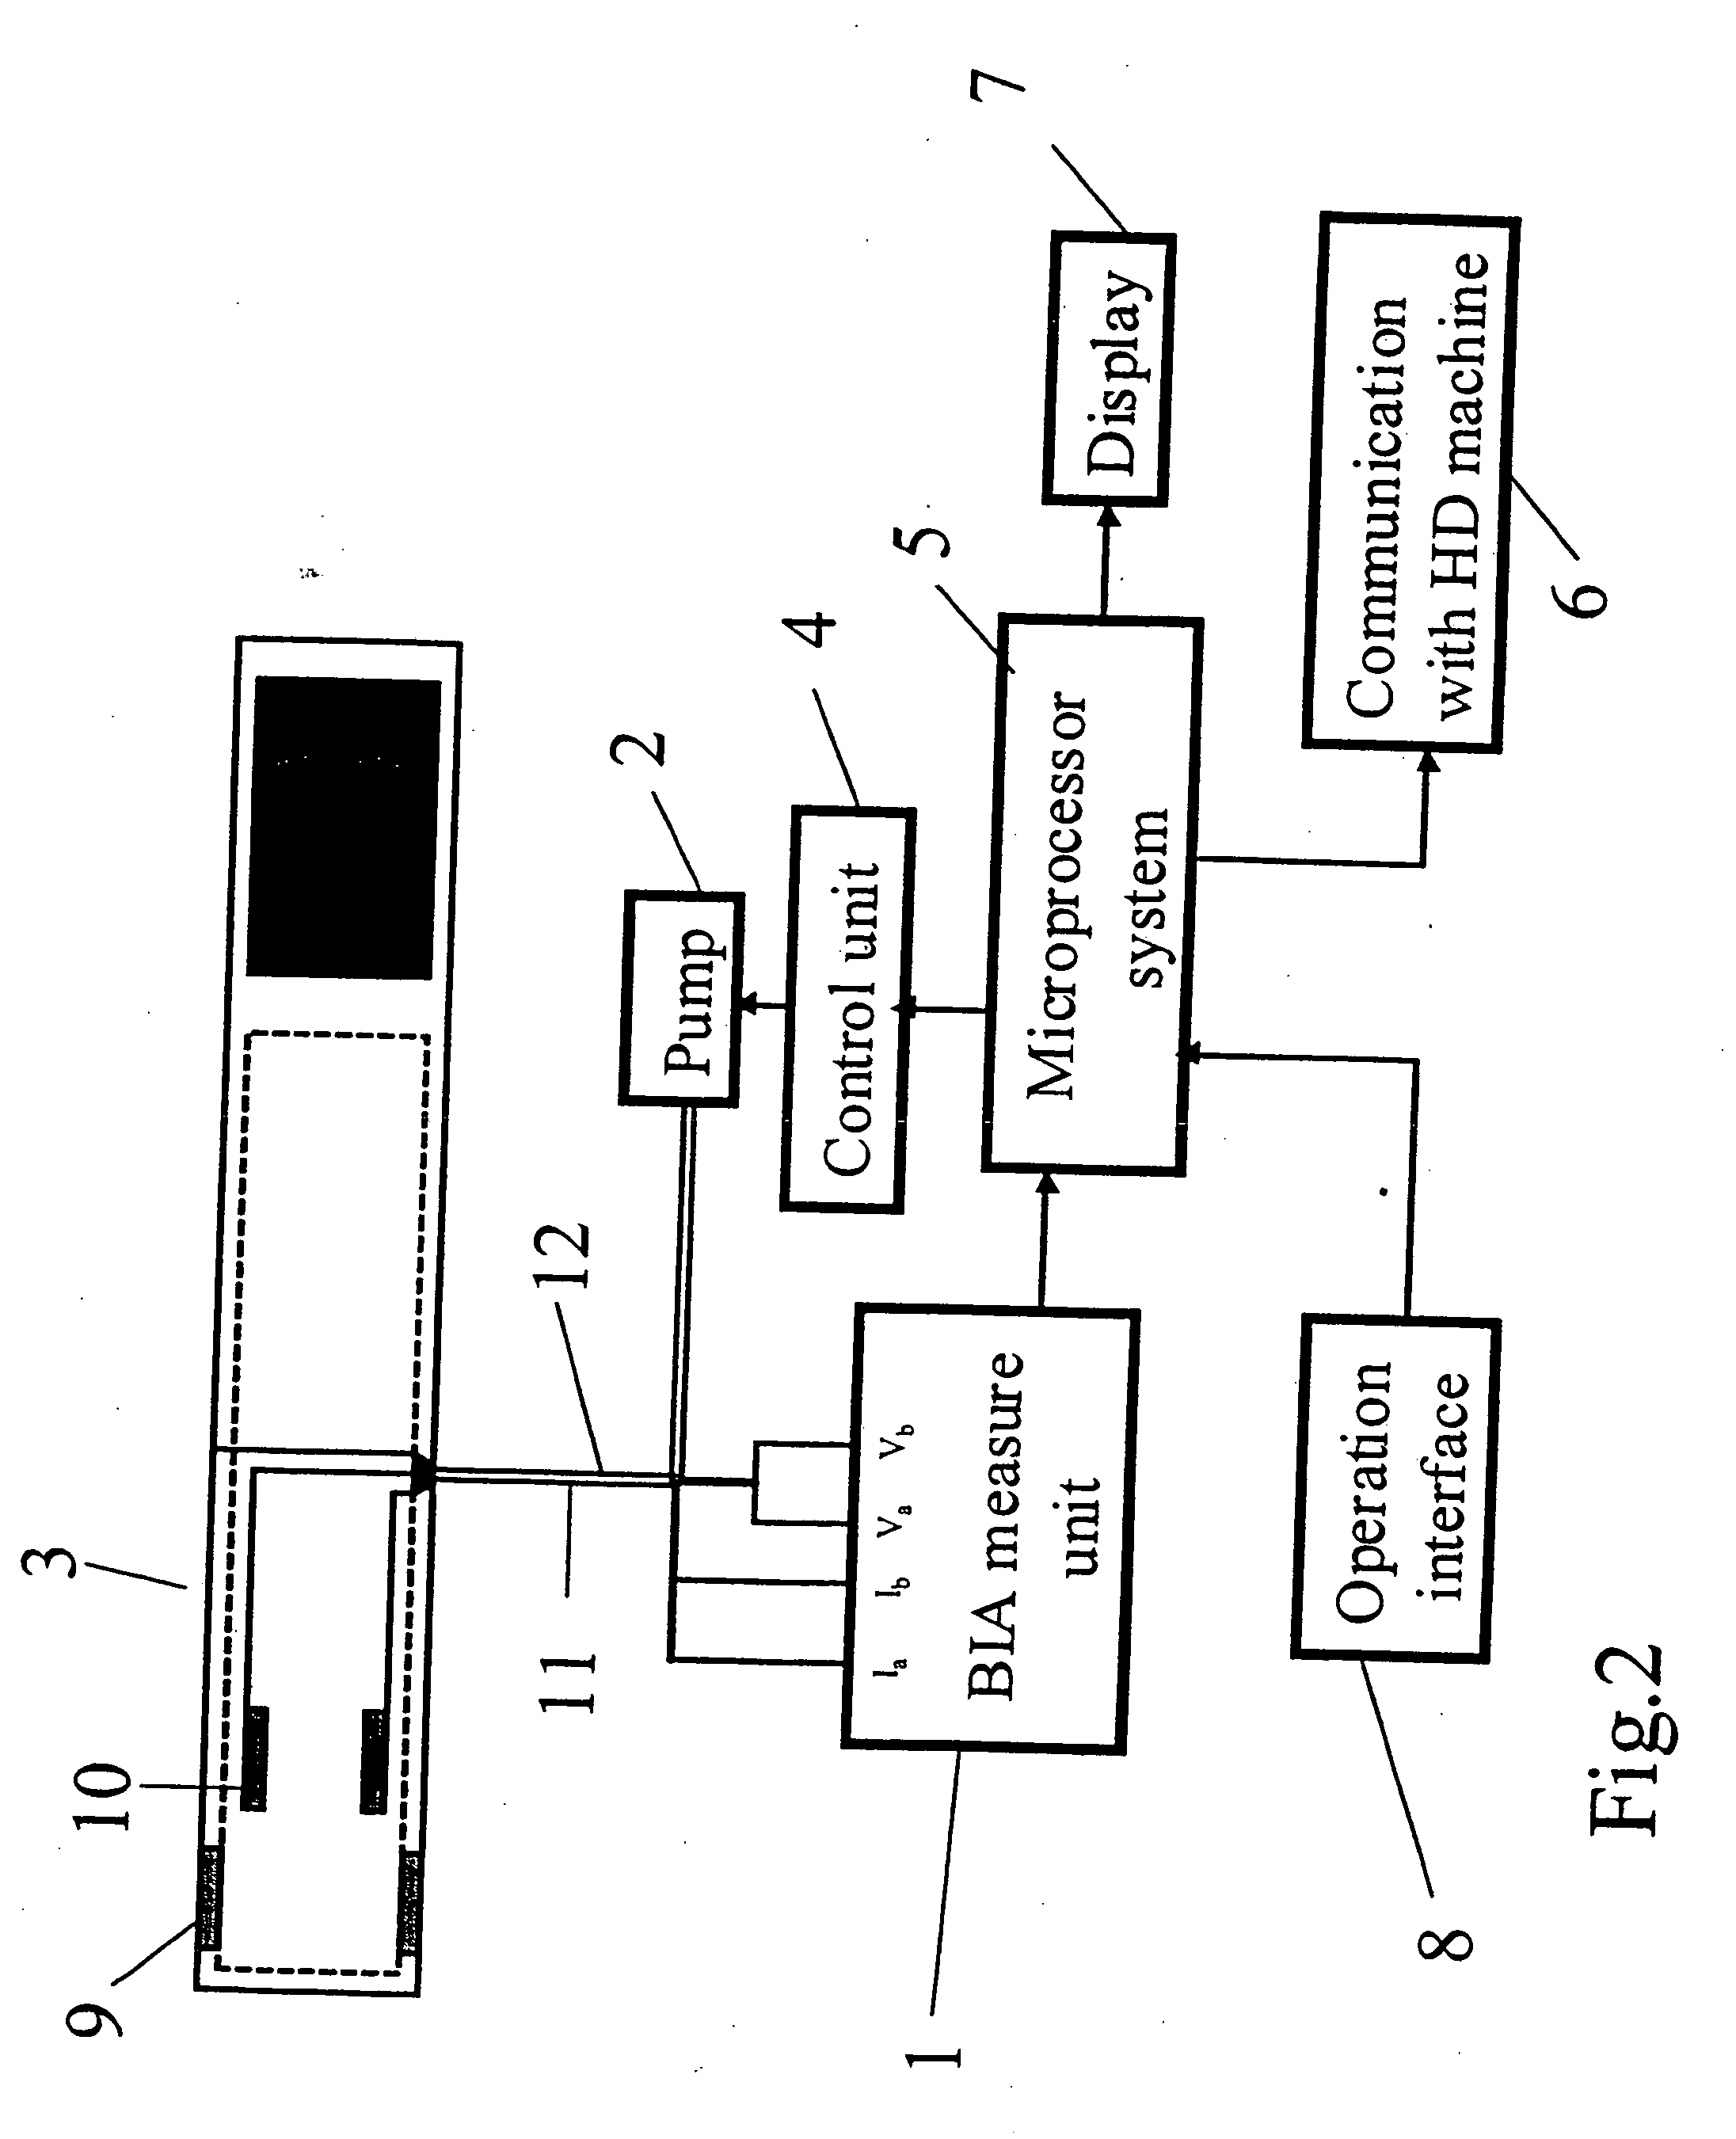 Device and method for the determination of dry weight by continuous measurement of resistance and calculation of circumference in a body segment using segmental bioimpedance analysis